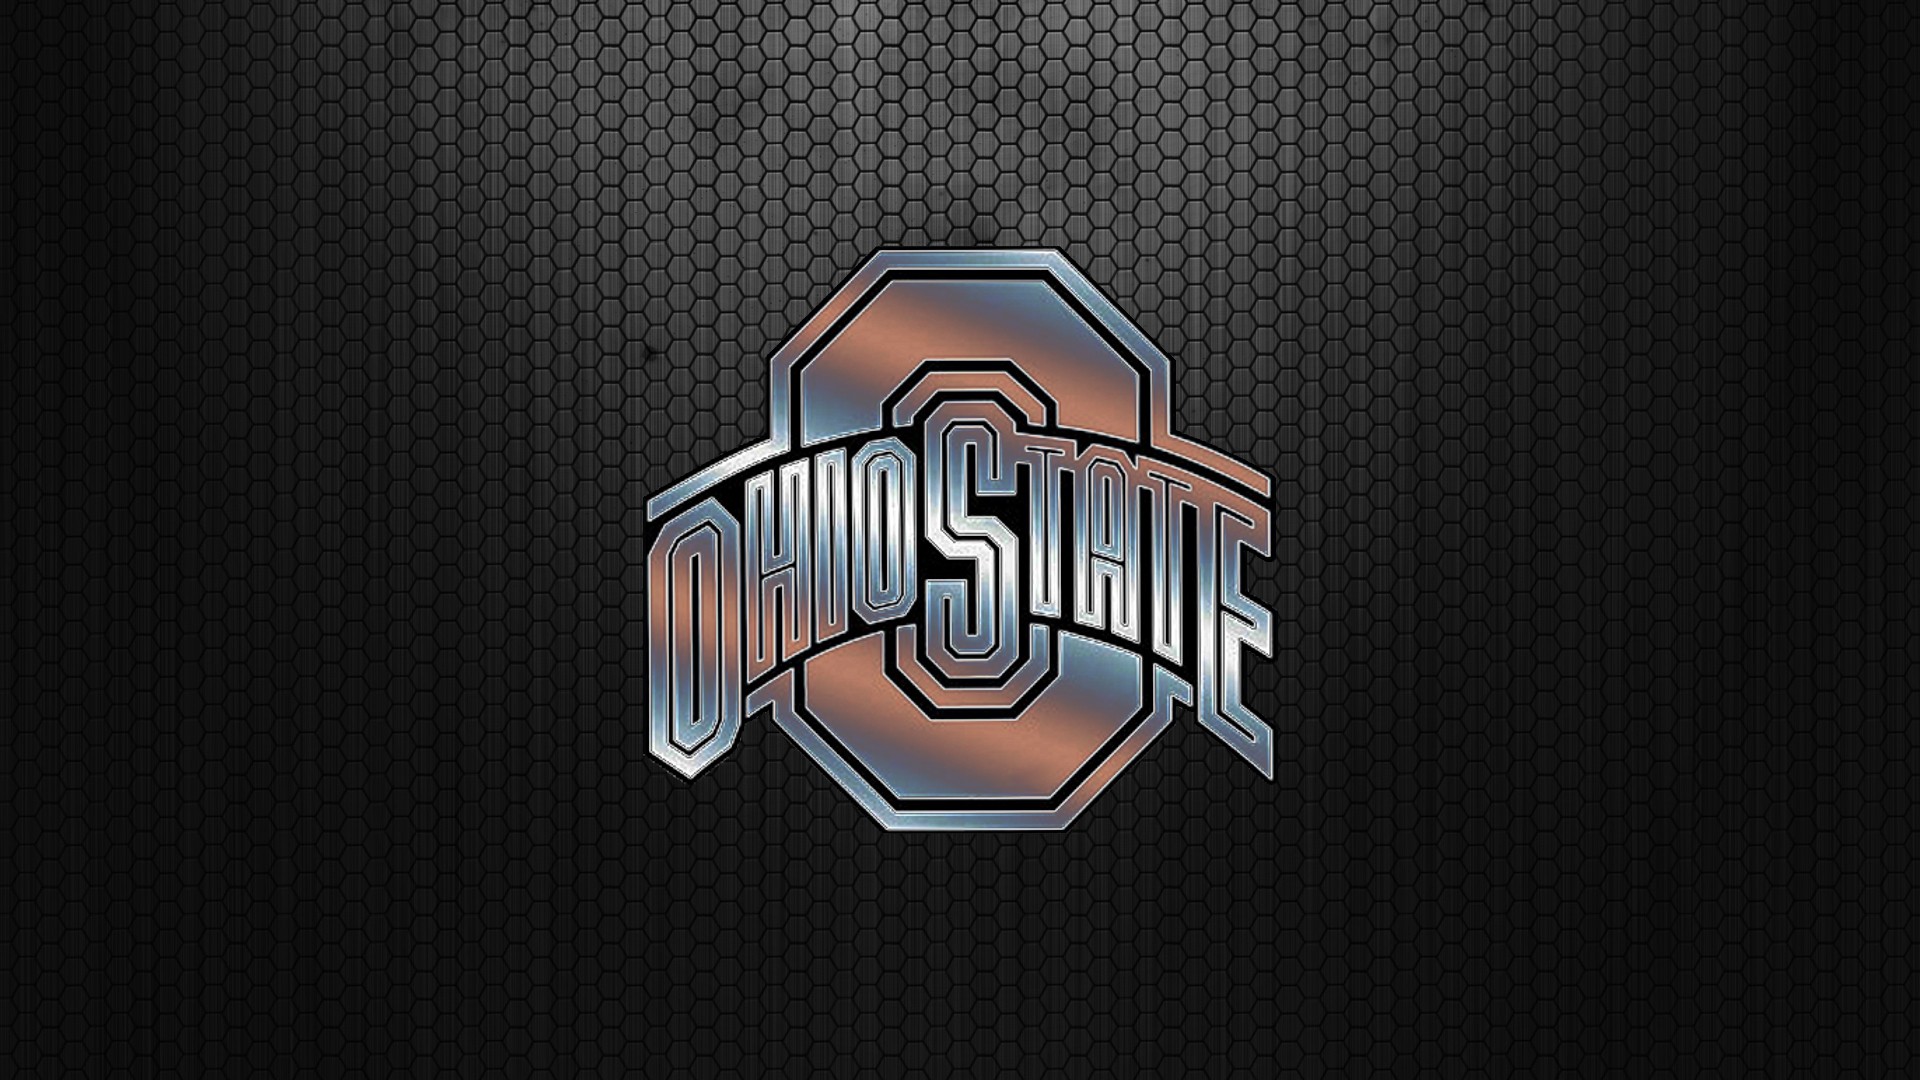 1920x1080 Wallpapers Ohio State Football 1024 X 576 596 Kb Png HD Wallpapers .